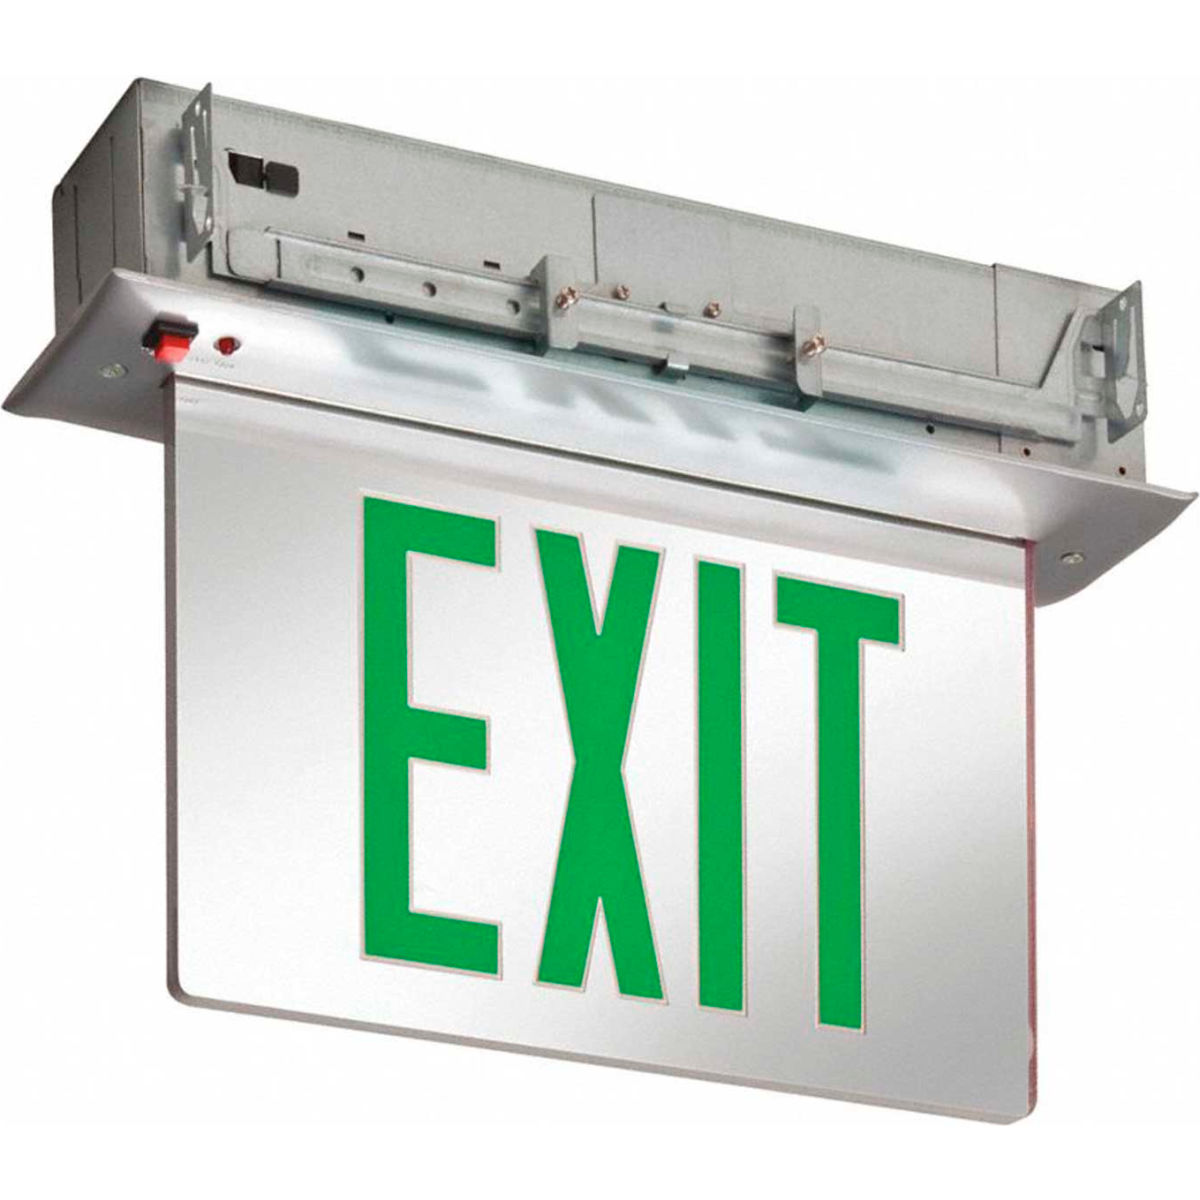 Picture of Acuity Brands B2085136 Lithonia Lighting EDGR 1 G EL M4 - LED Edge-Lit Exit Sign - Green